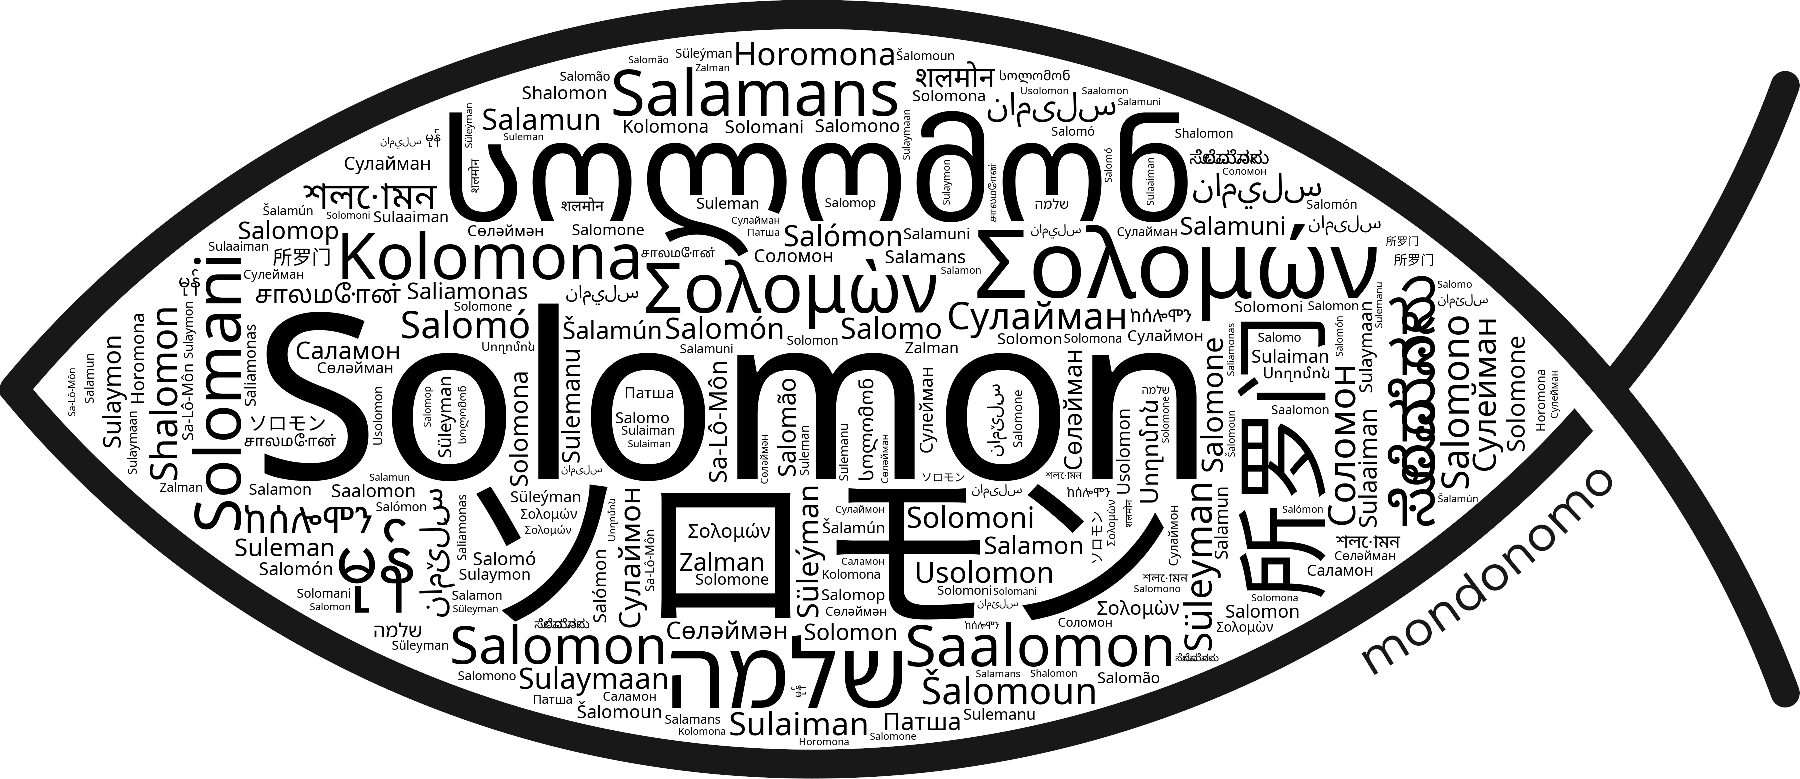 Name Solomon in the world's Bibles